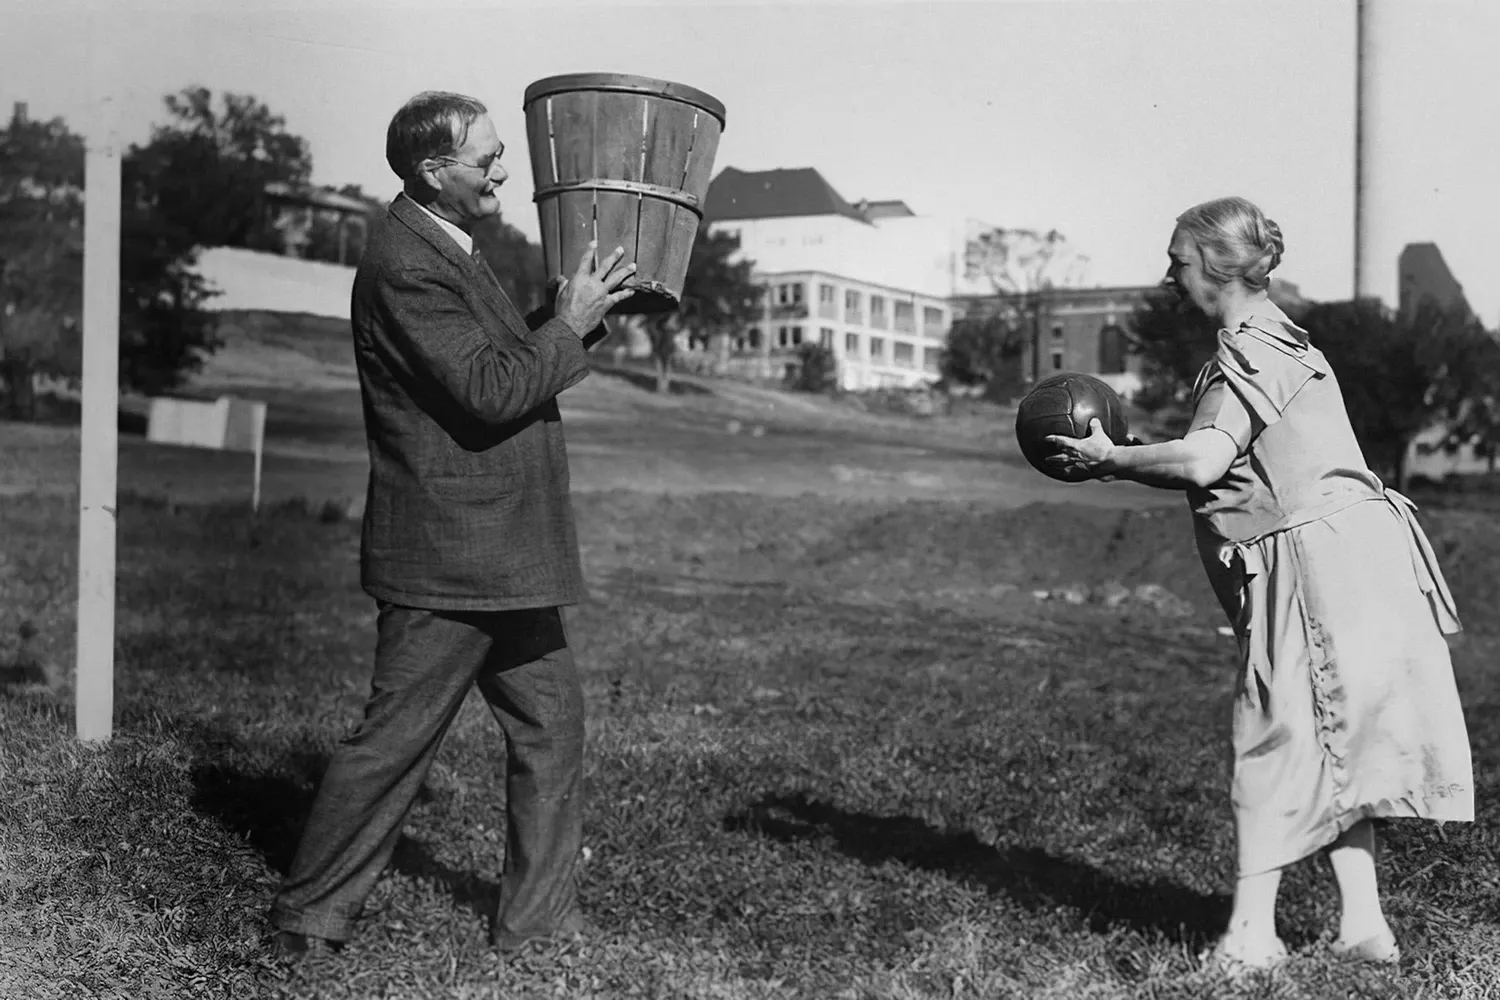 Vintage basketball game with peach basket